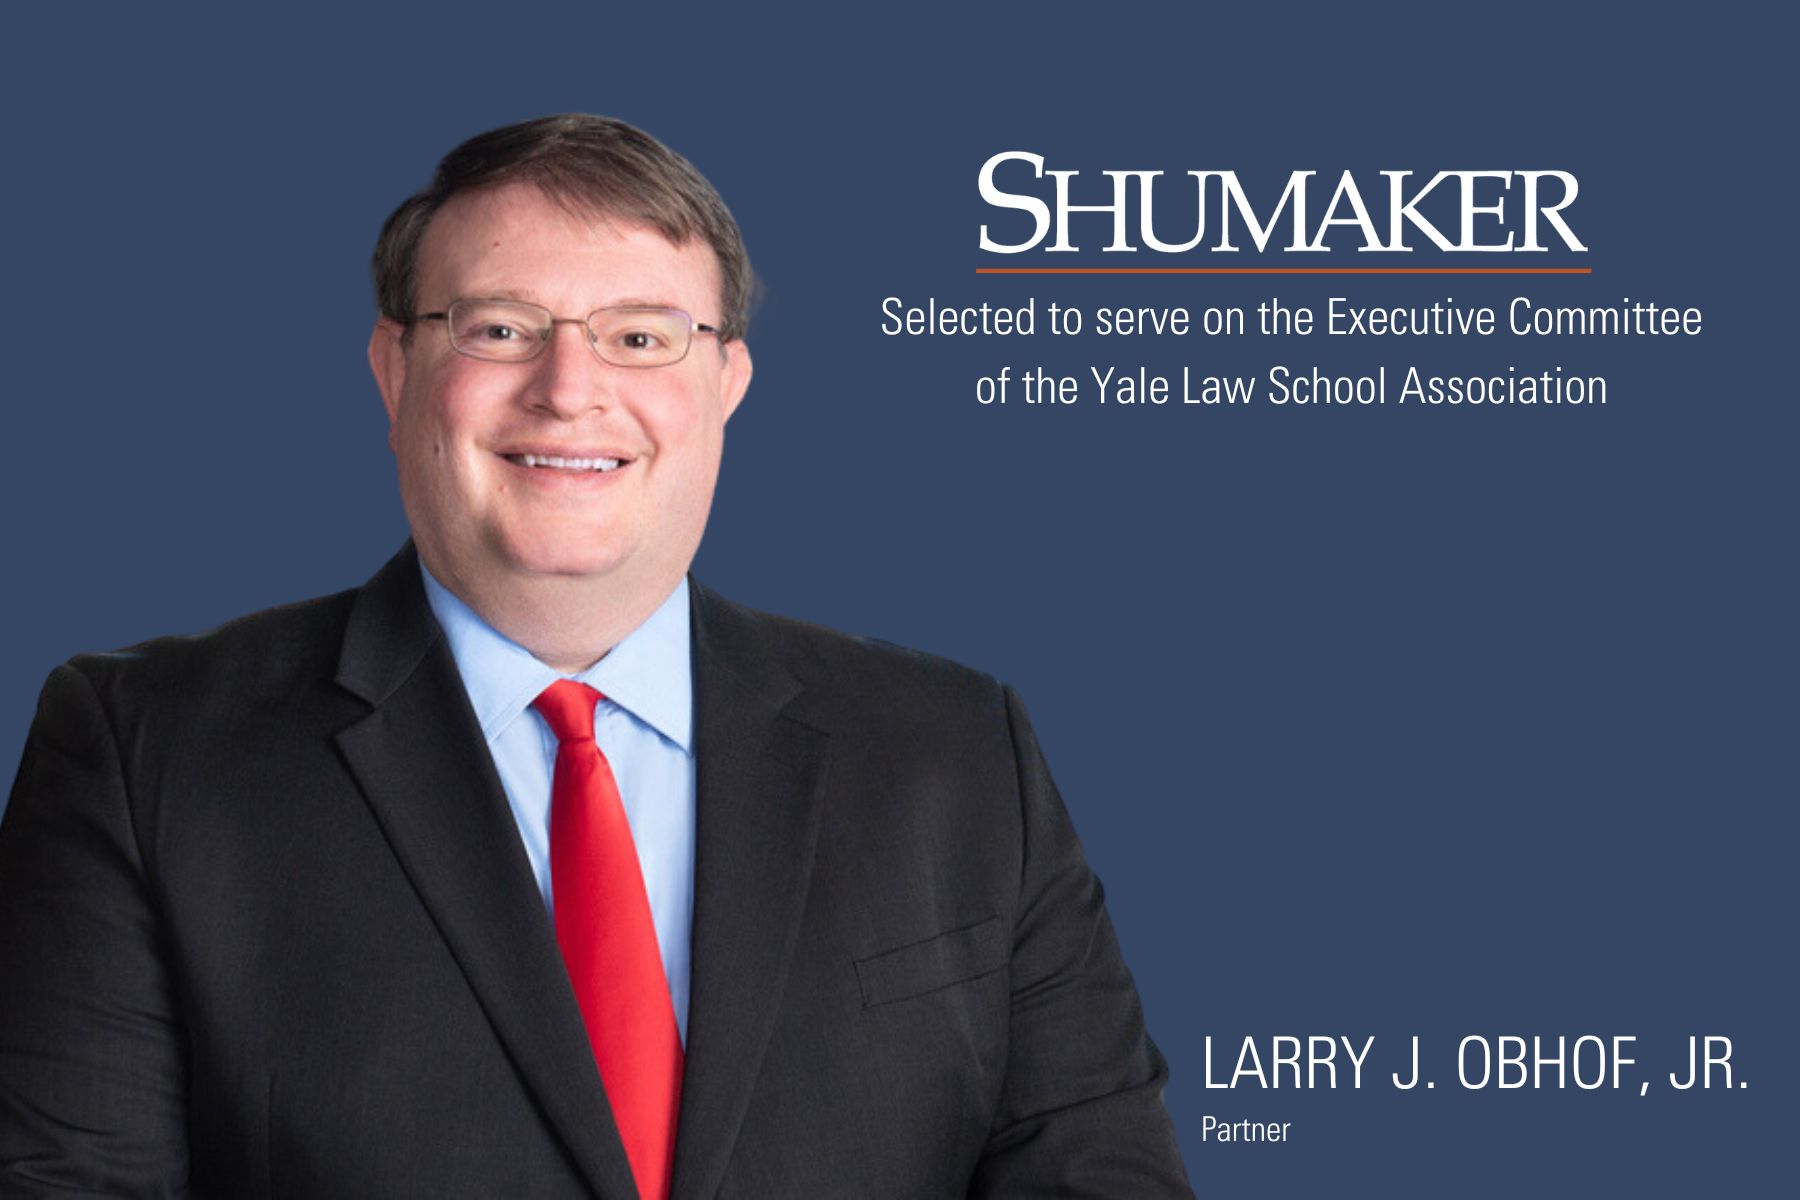 Larry J. Obhof, Jr. Selected to Serve on the Executive Committee of the Yale Law School Association